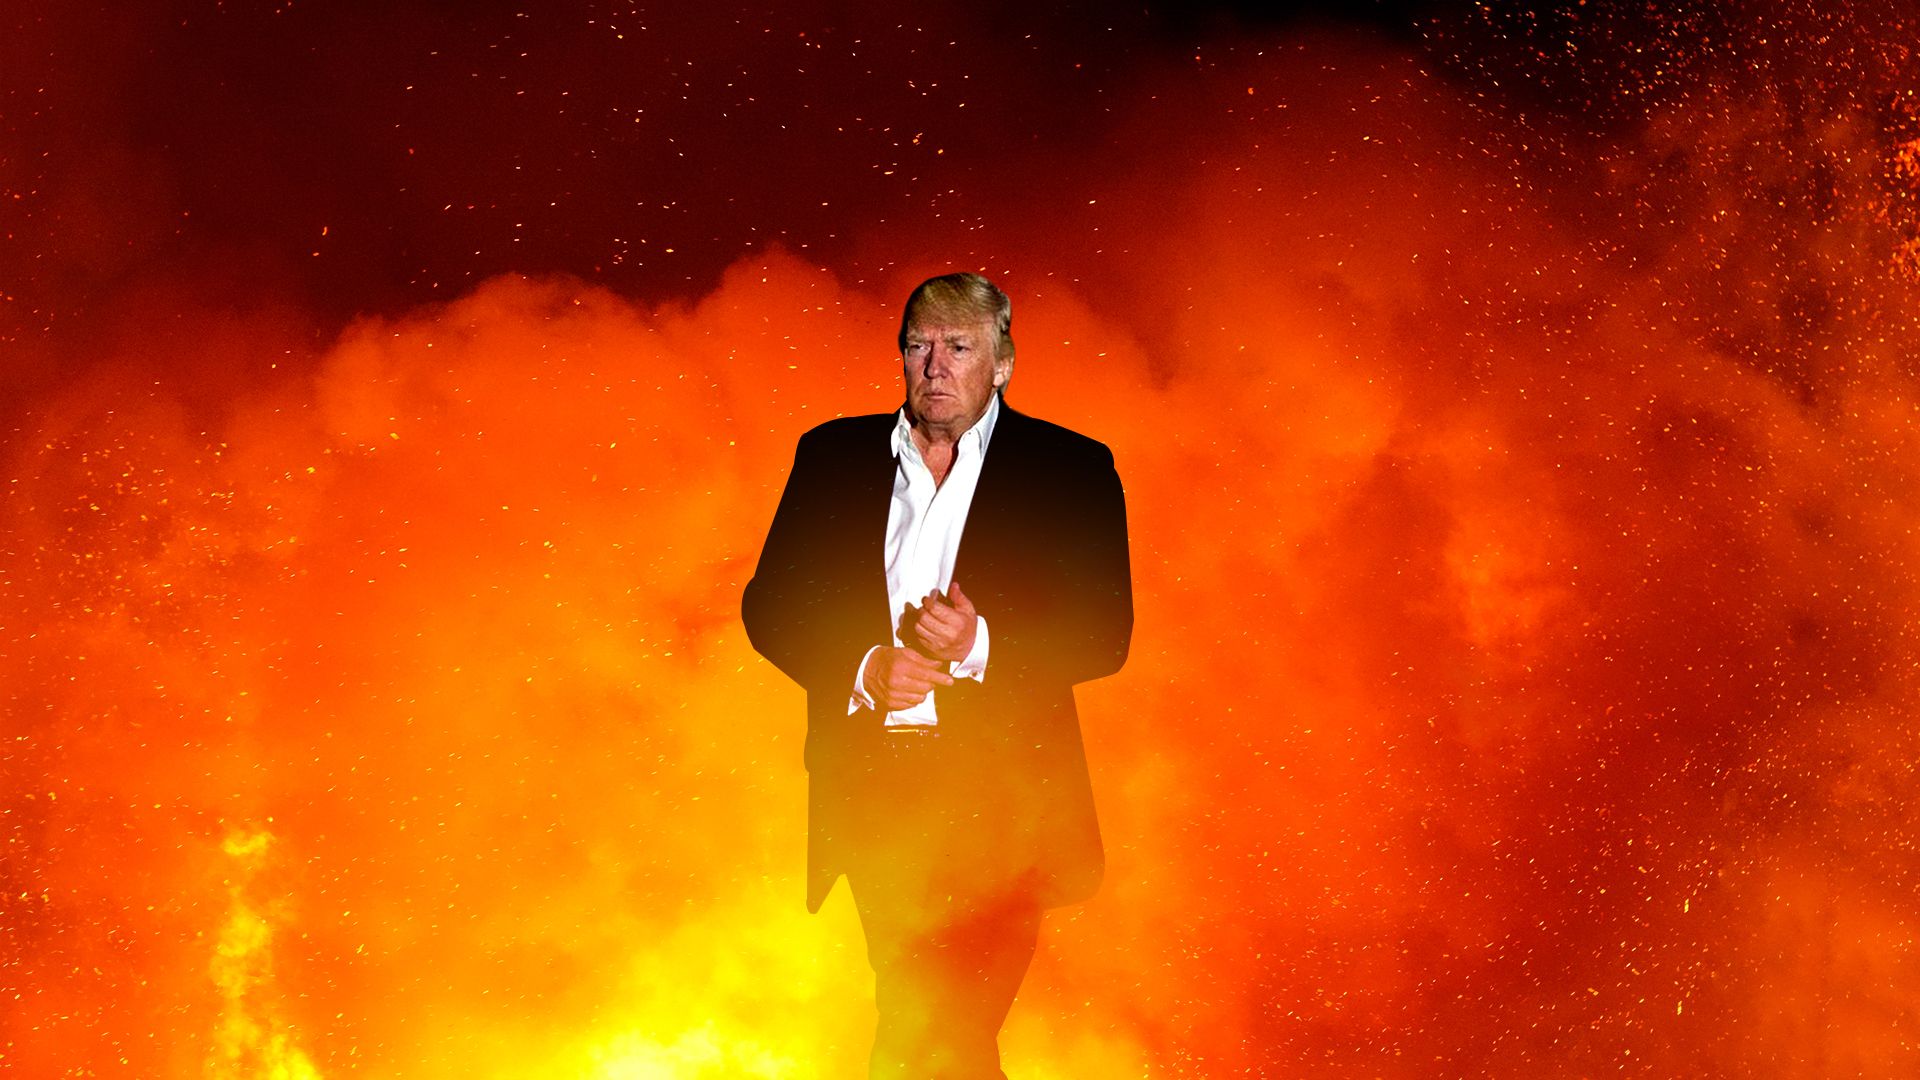 Illustration of Trump emerging from flames 